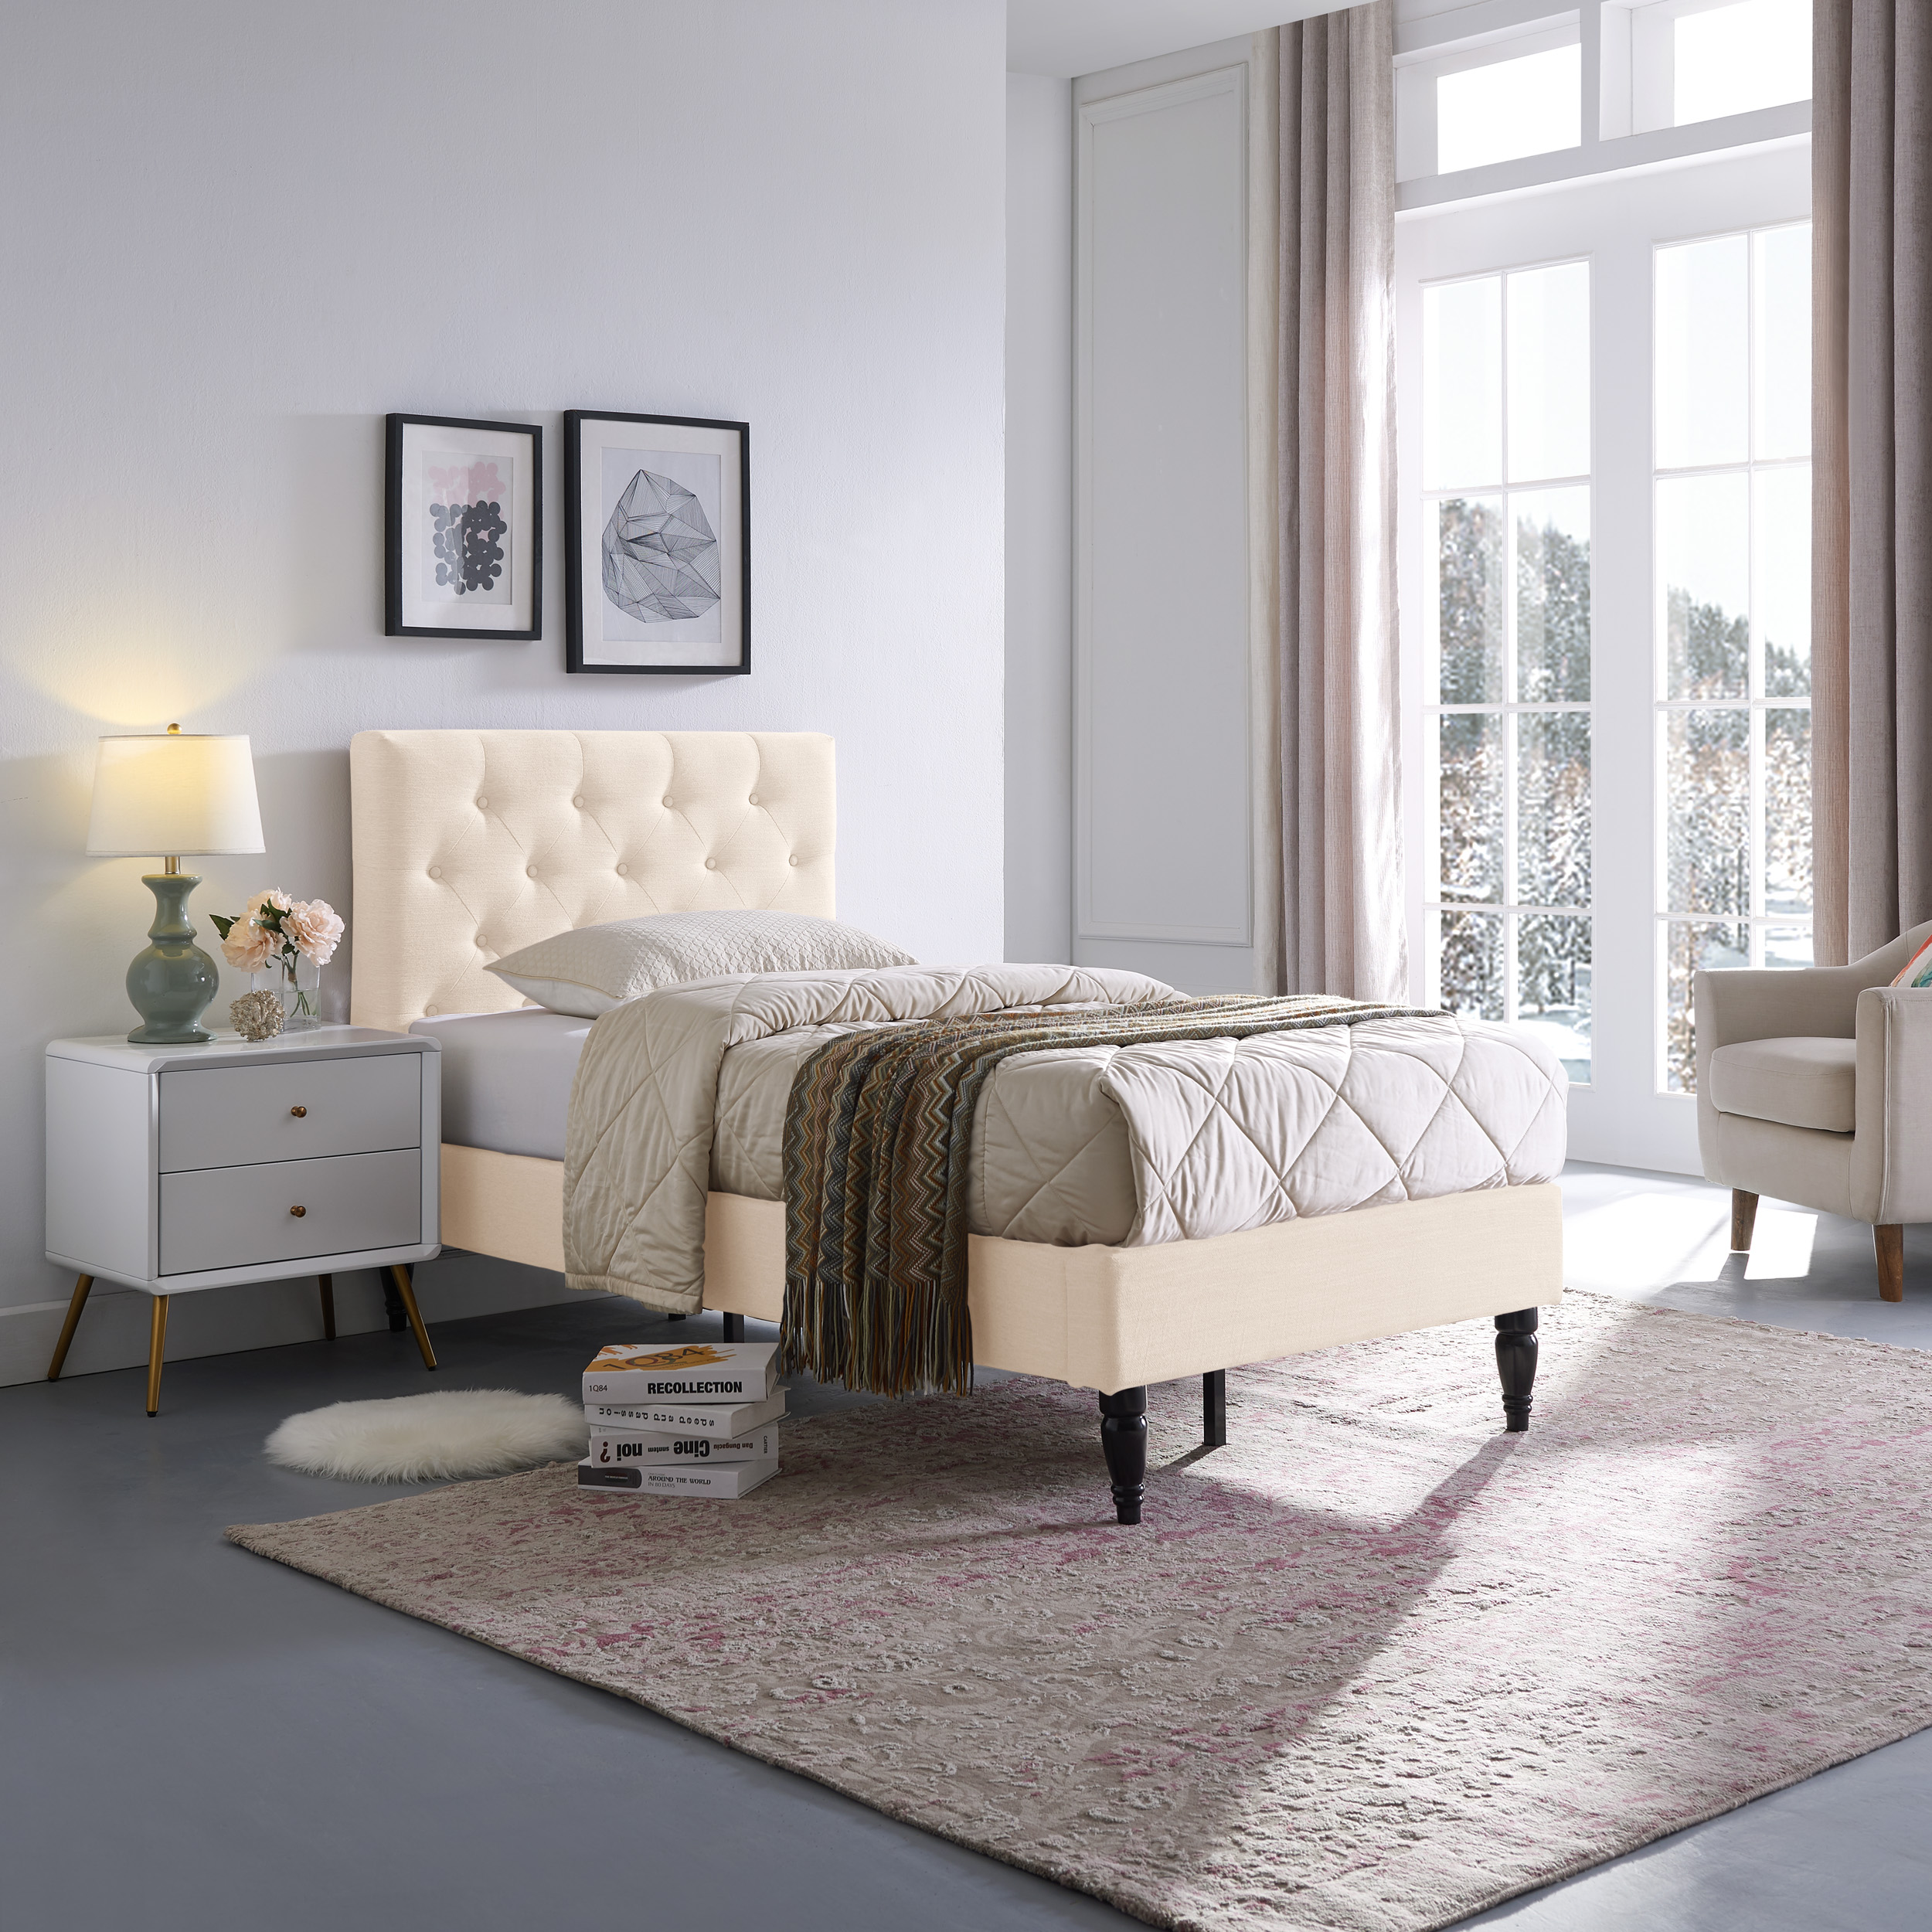 Lera Contemporary Upholstered Twin Bed Platform, Beige and Black - image 2 of 13